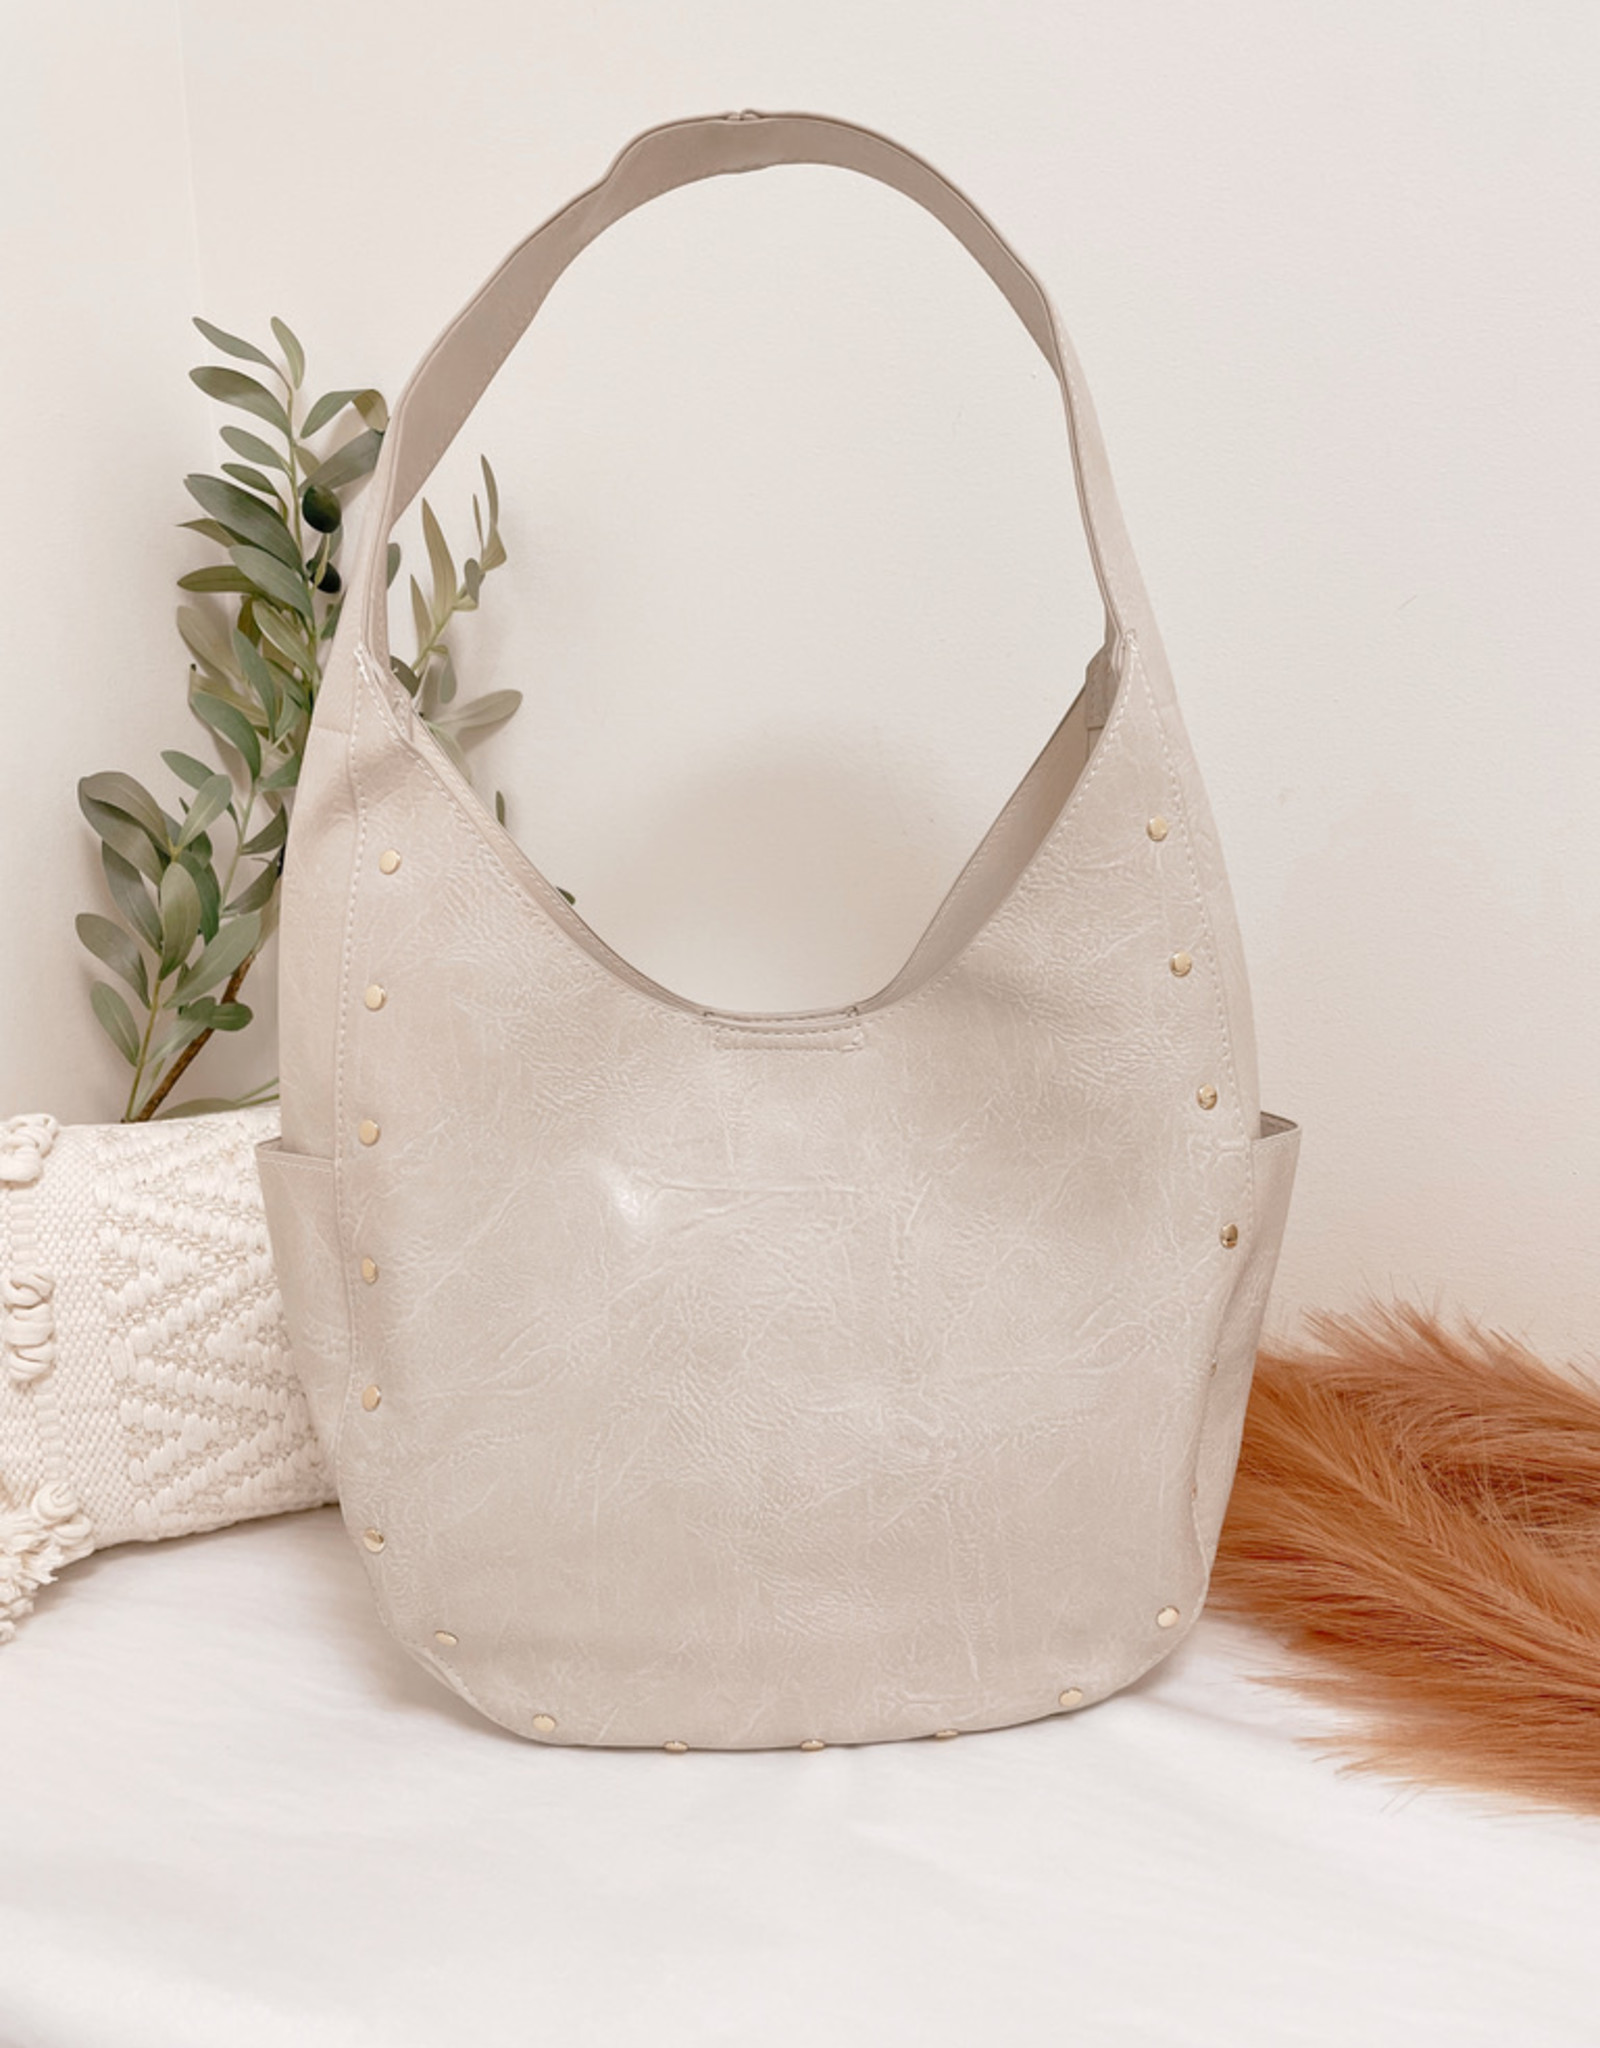 The Julie Faux Leather Studded Hobo Bag